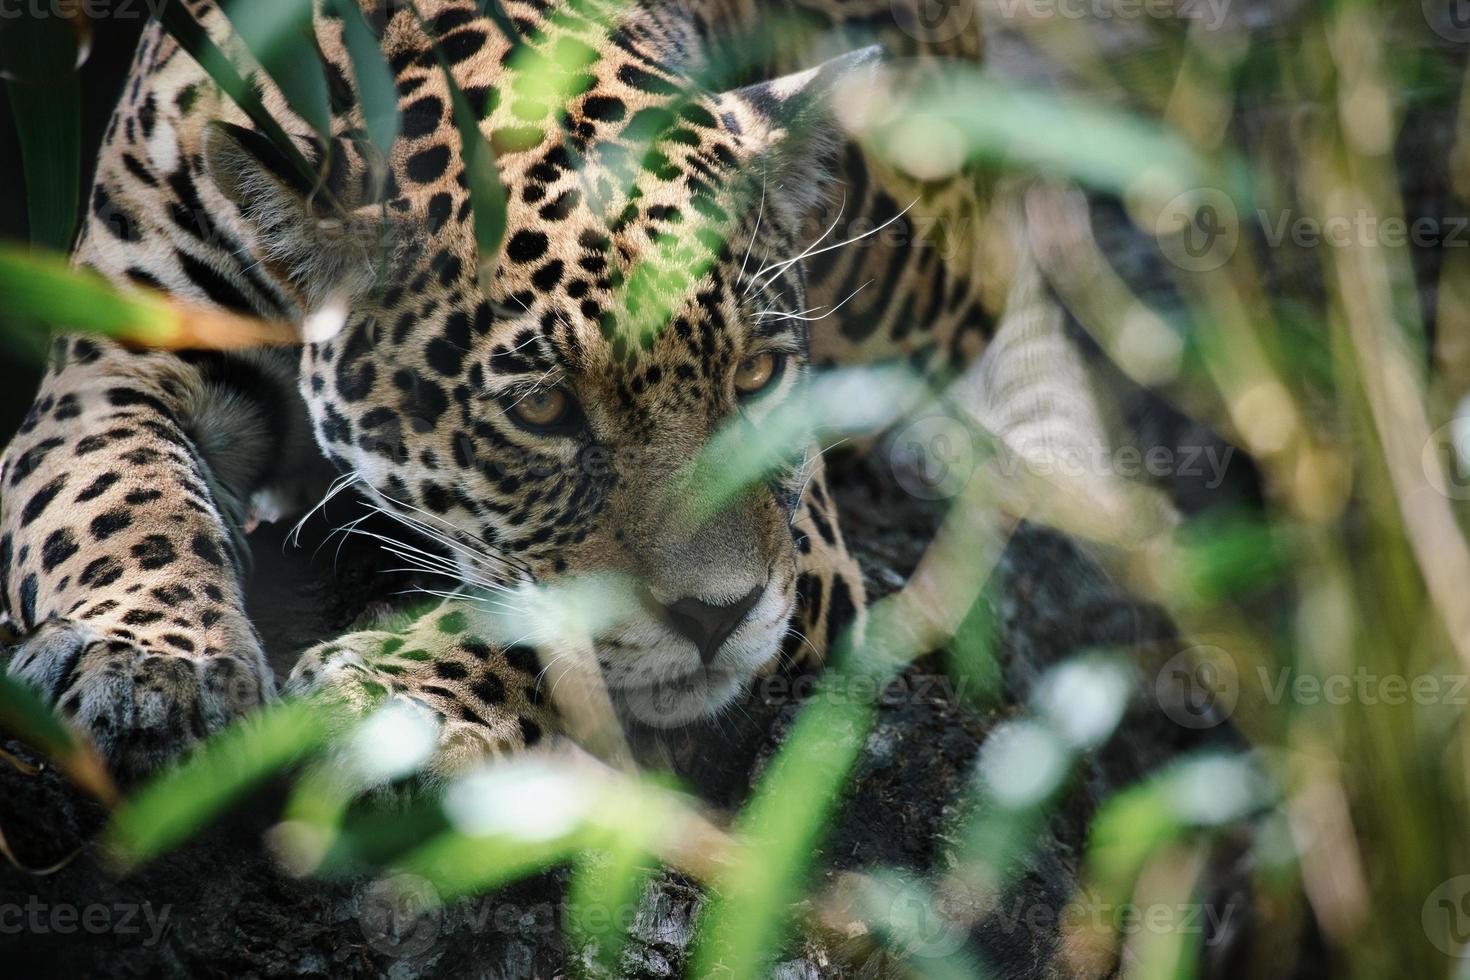 Jaguar lying behind grass. spotted fur, camouflaged lurking. The big cat is a predator. photo